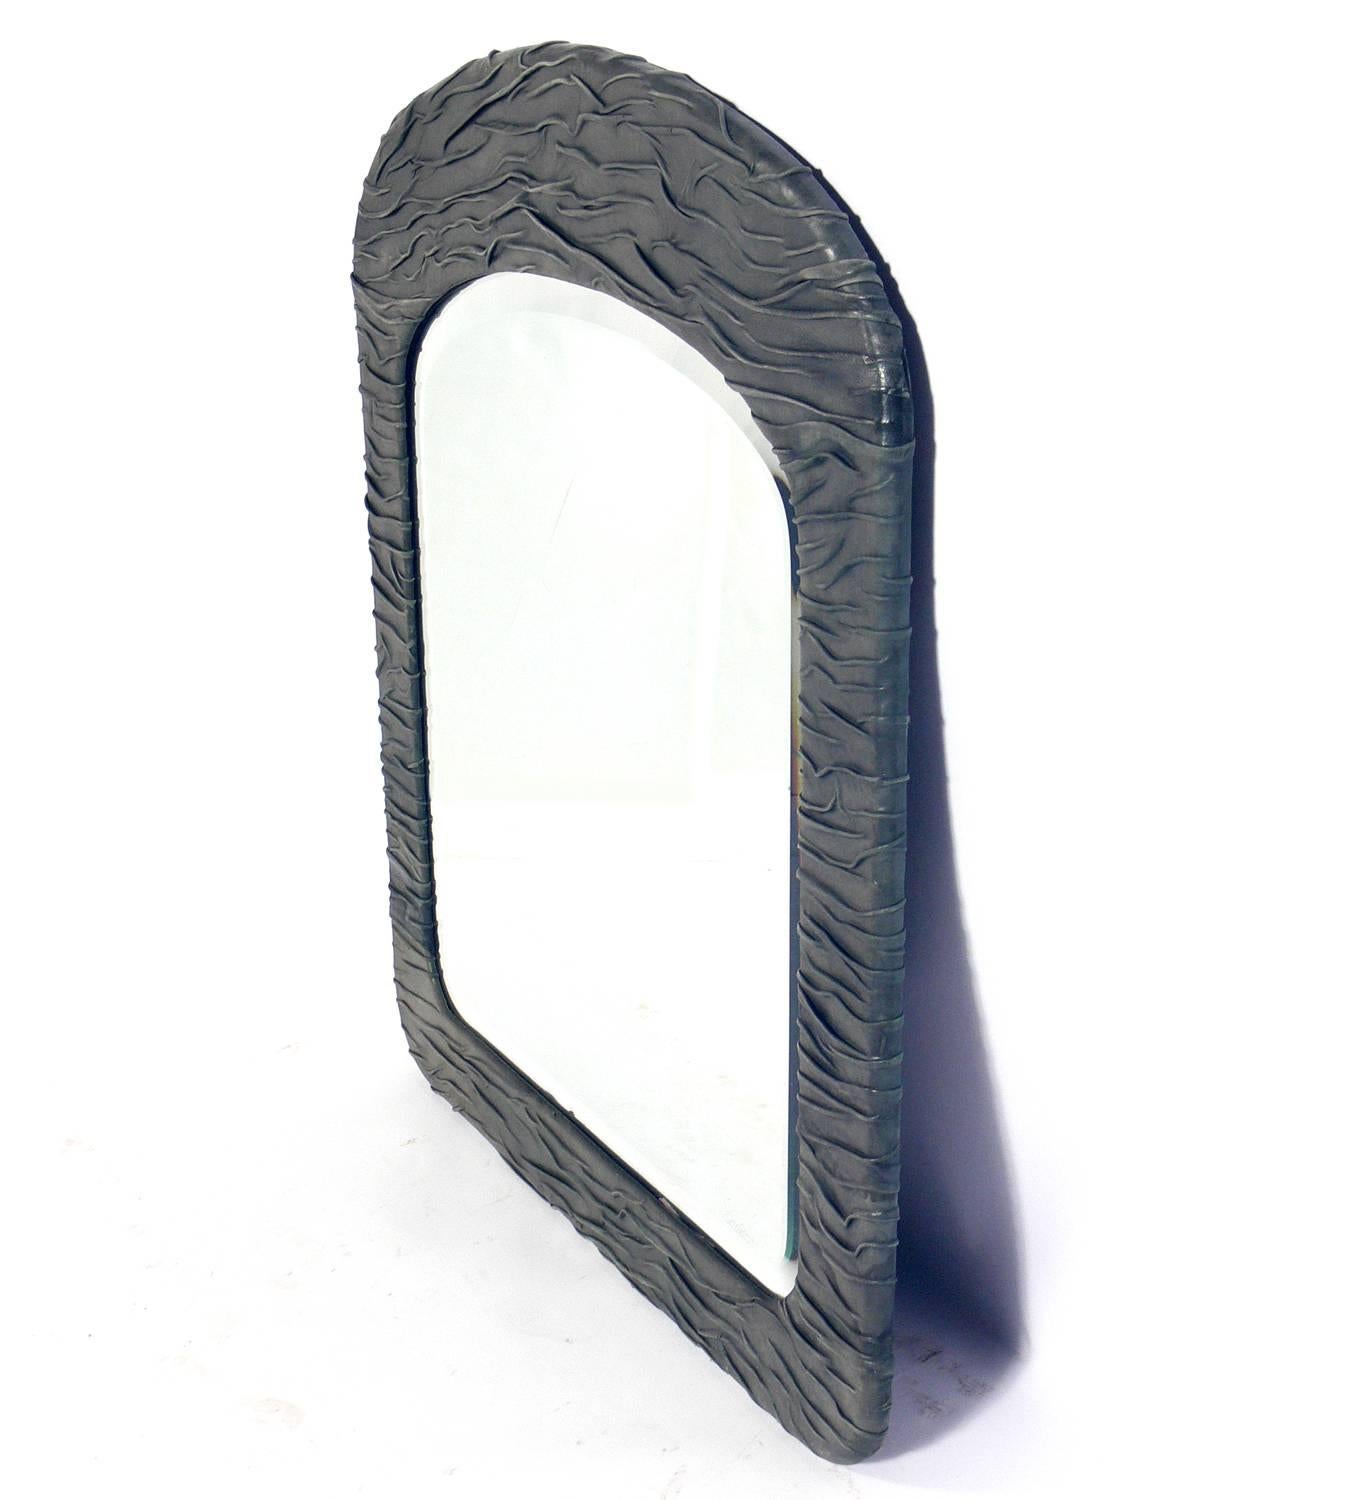 Chic artist made leather mirror, American, circa 1980s. Handmade and signed by the artist, Jane Adams. This piece is executed in a greenish gray color leather.